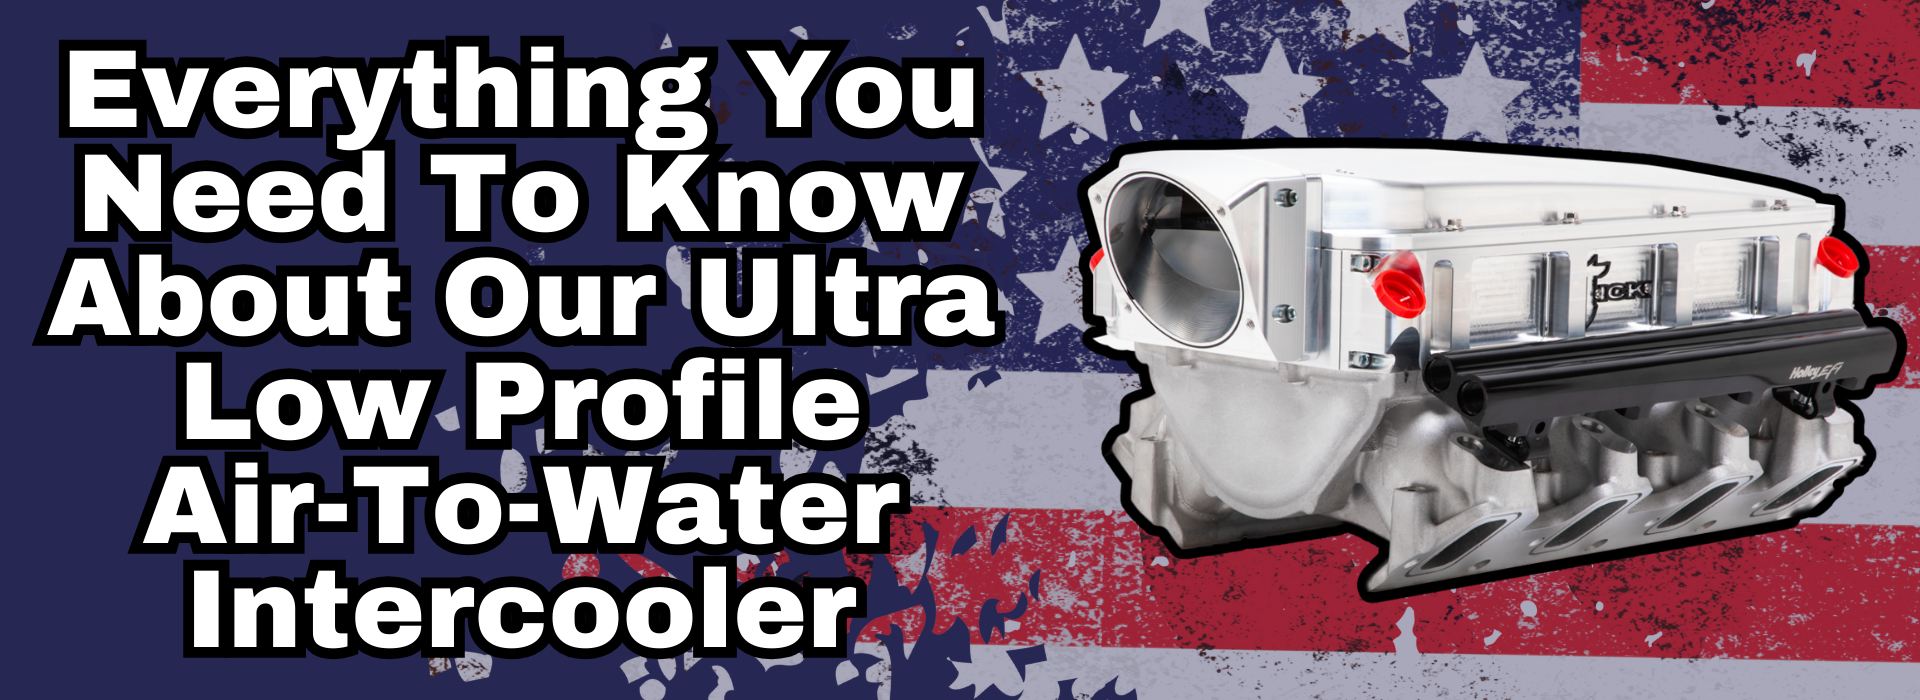 Everything You Need To Know About Our Ultra Low Air-To-Water Intercooler